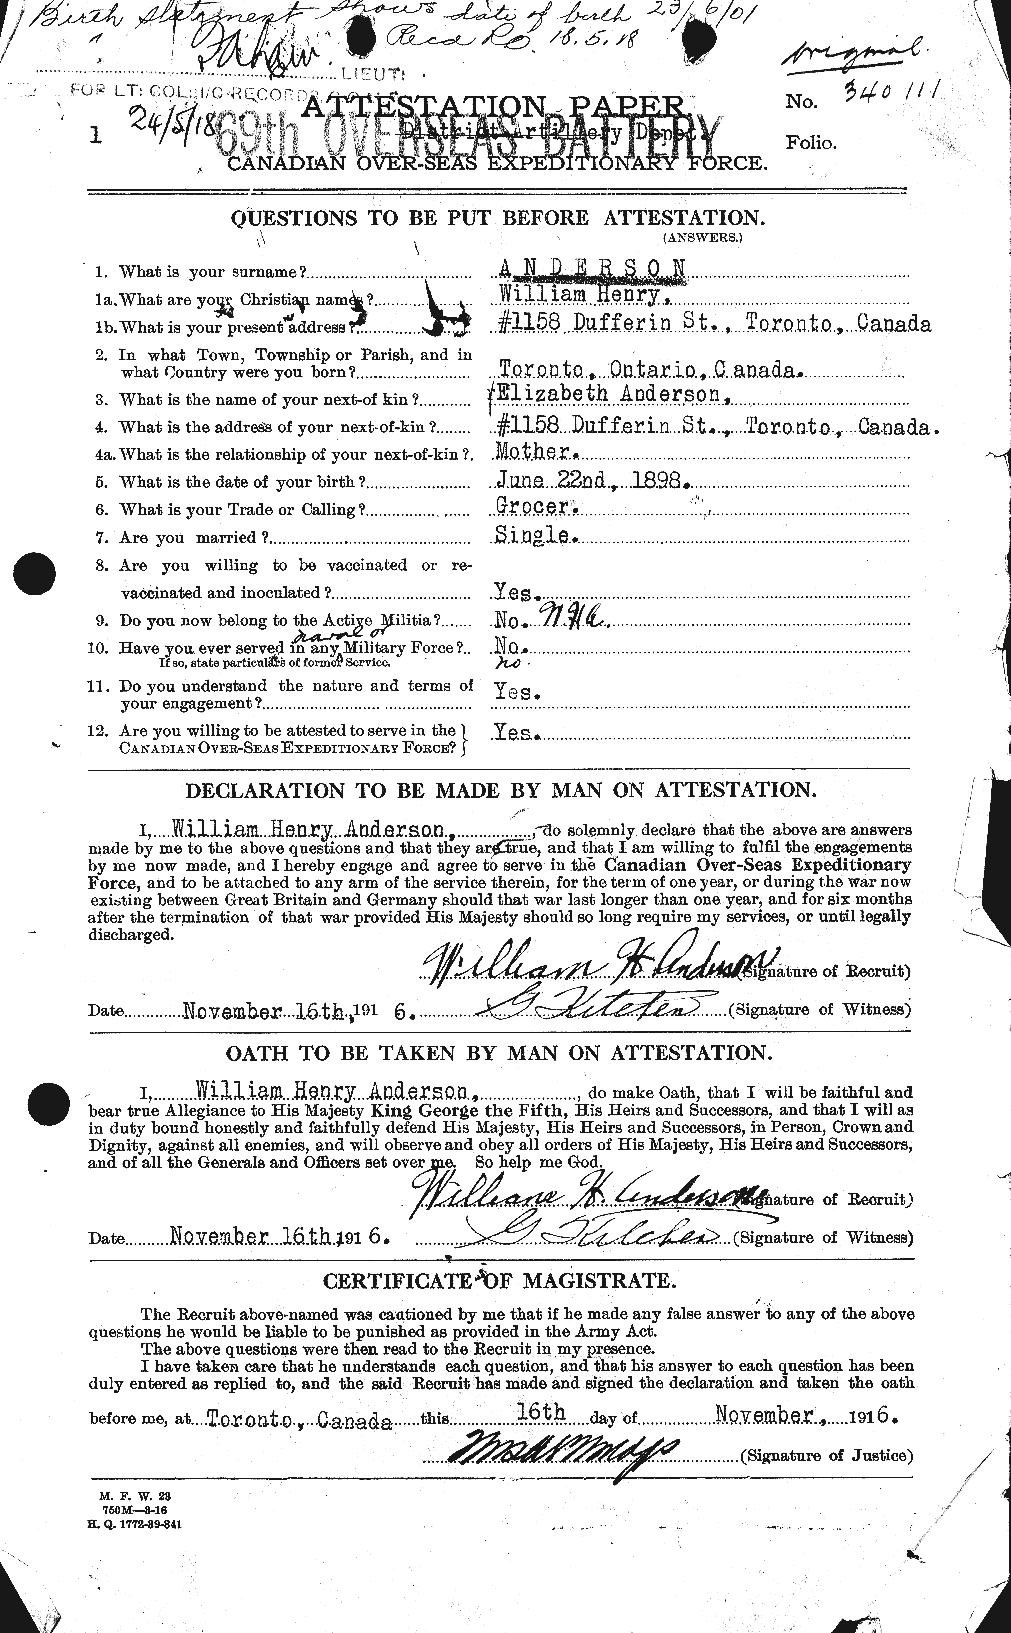 Personnel Records of the First World War - CEF 210801a